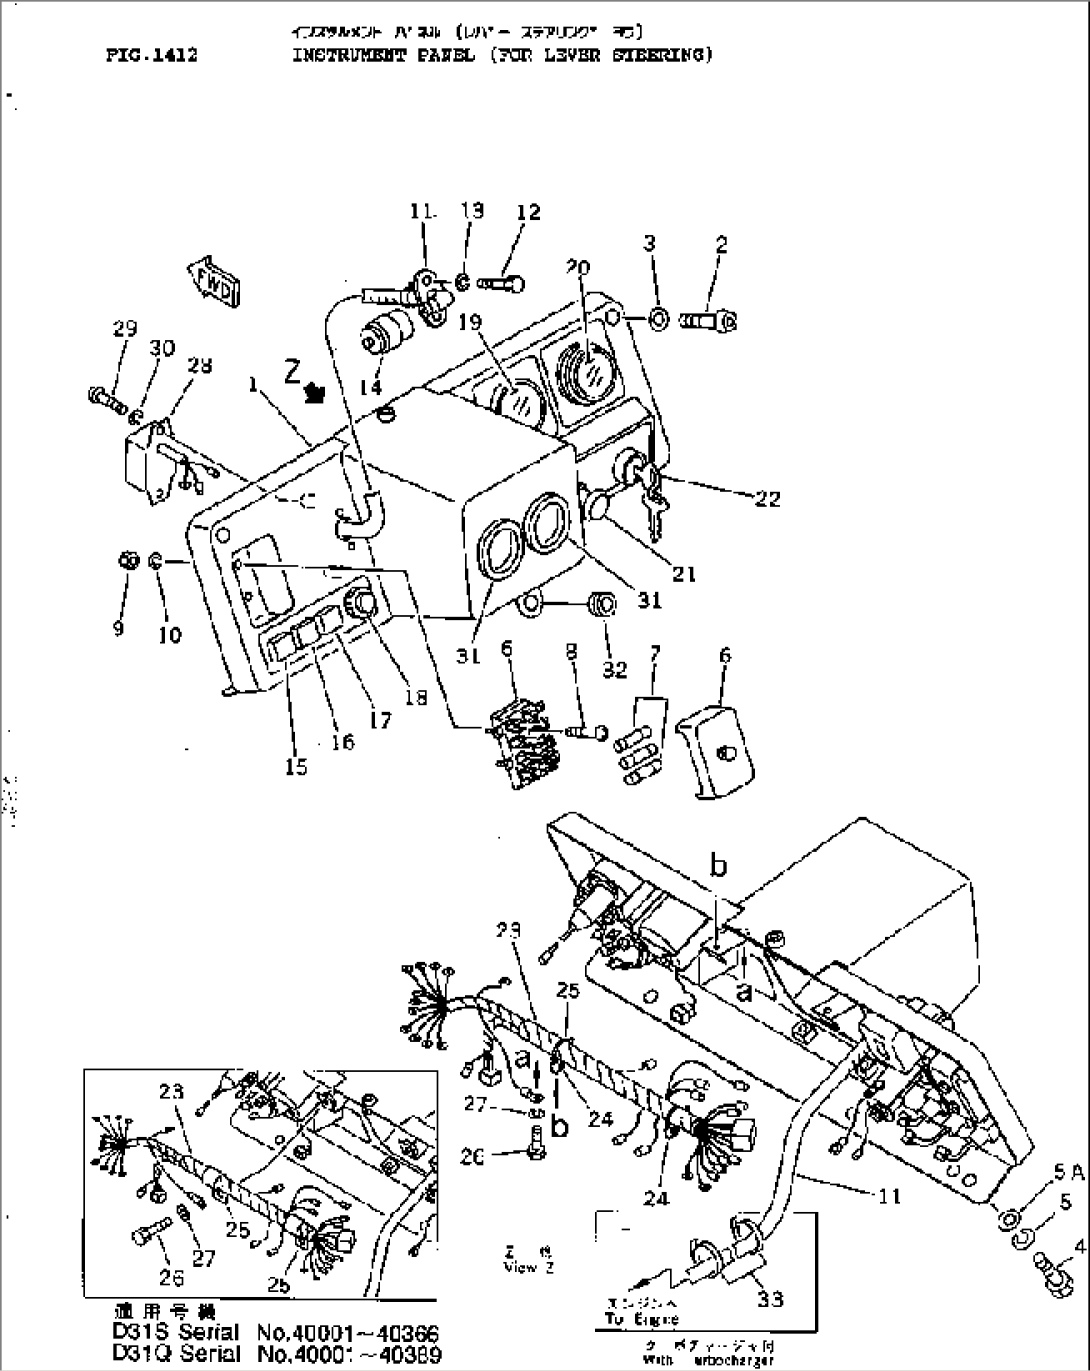 INSTRUMENT PANEL (FOR LEVER STEERING)